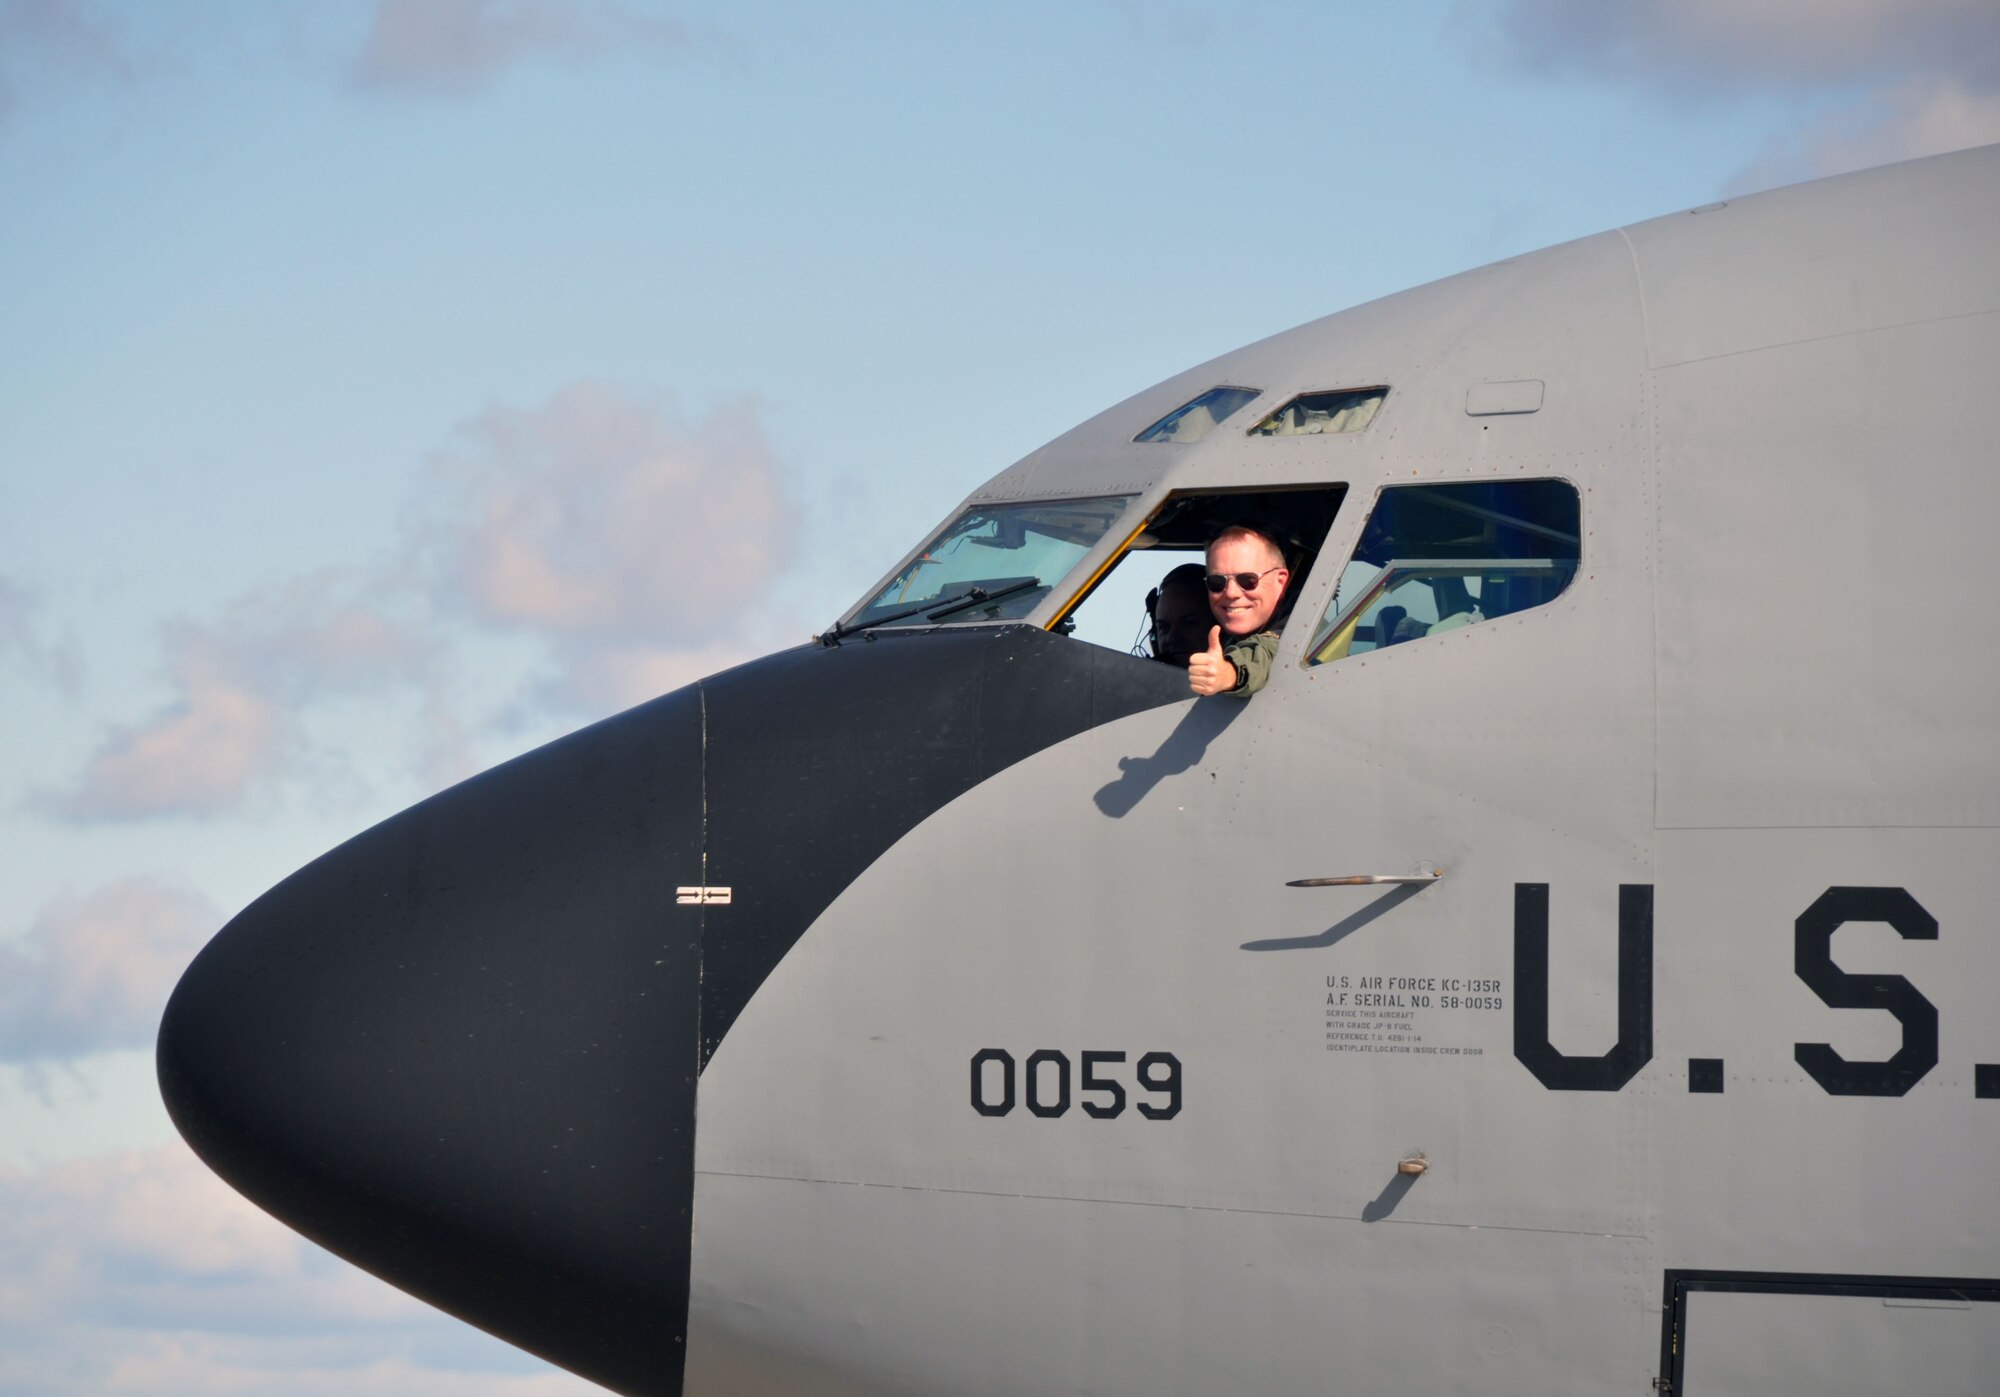 Col. Ted Metzgar, Commander, 128th Air Refueling Wing signals "thumbs up" as he returns from a 4 month long deployment supporting Operation Unified Protector in Western Europe Friday, October 14, 2011 in Milwaukee. (U.S. Air Force photo/Capt. John P. Capra)